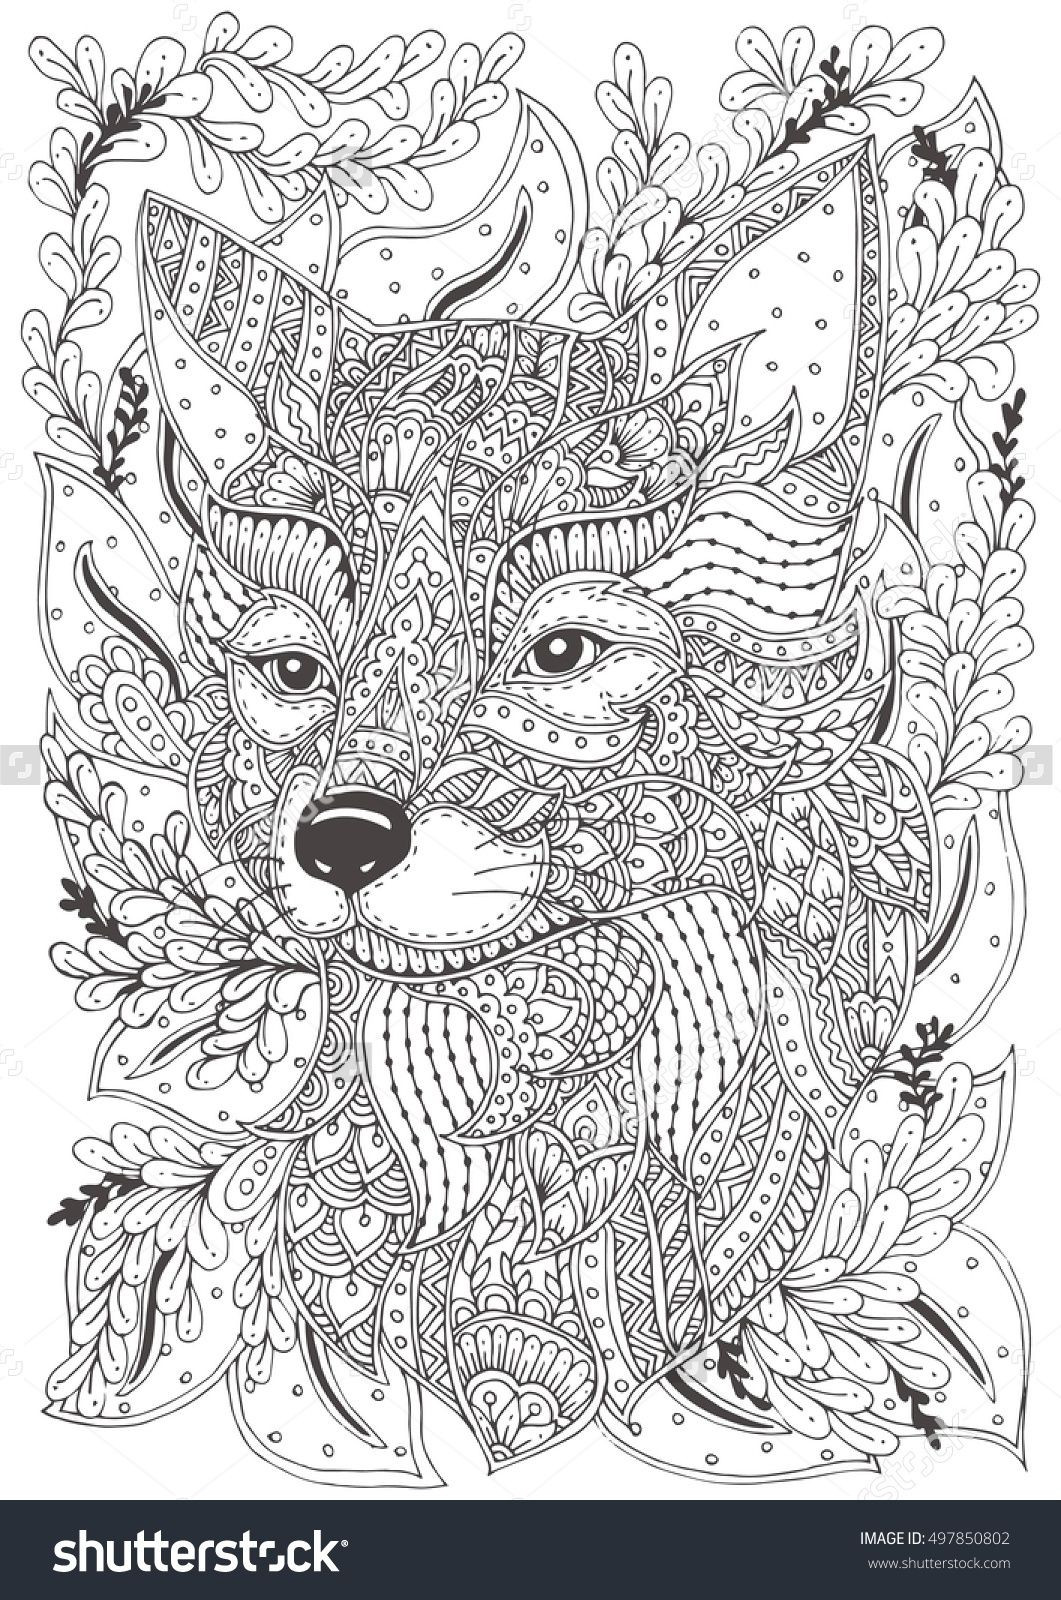 Adult Coloring Pages Animal Patterns
 Fox Hand drawn with ethnic floral doodle pattern Coloring page zendala design for spiritual